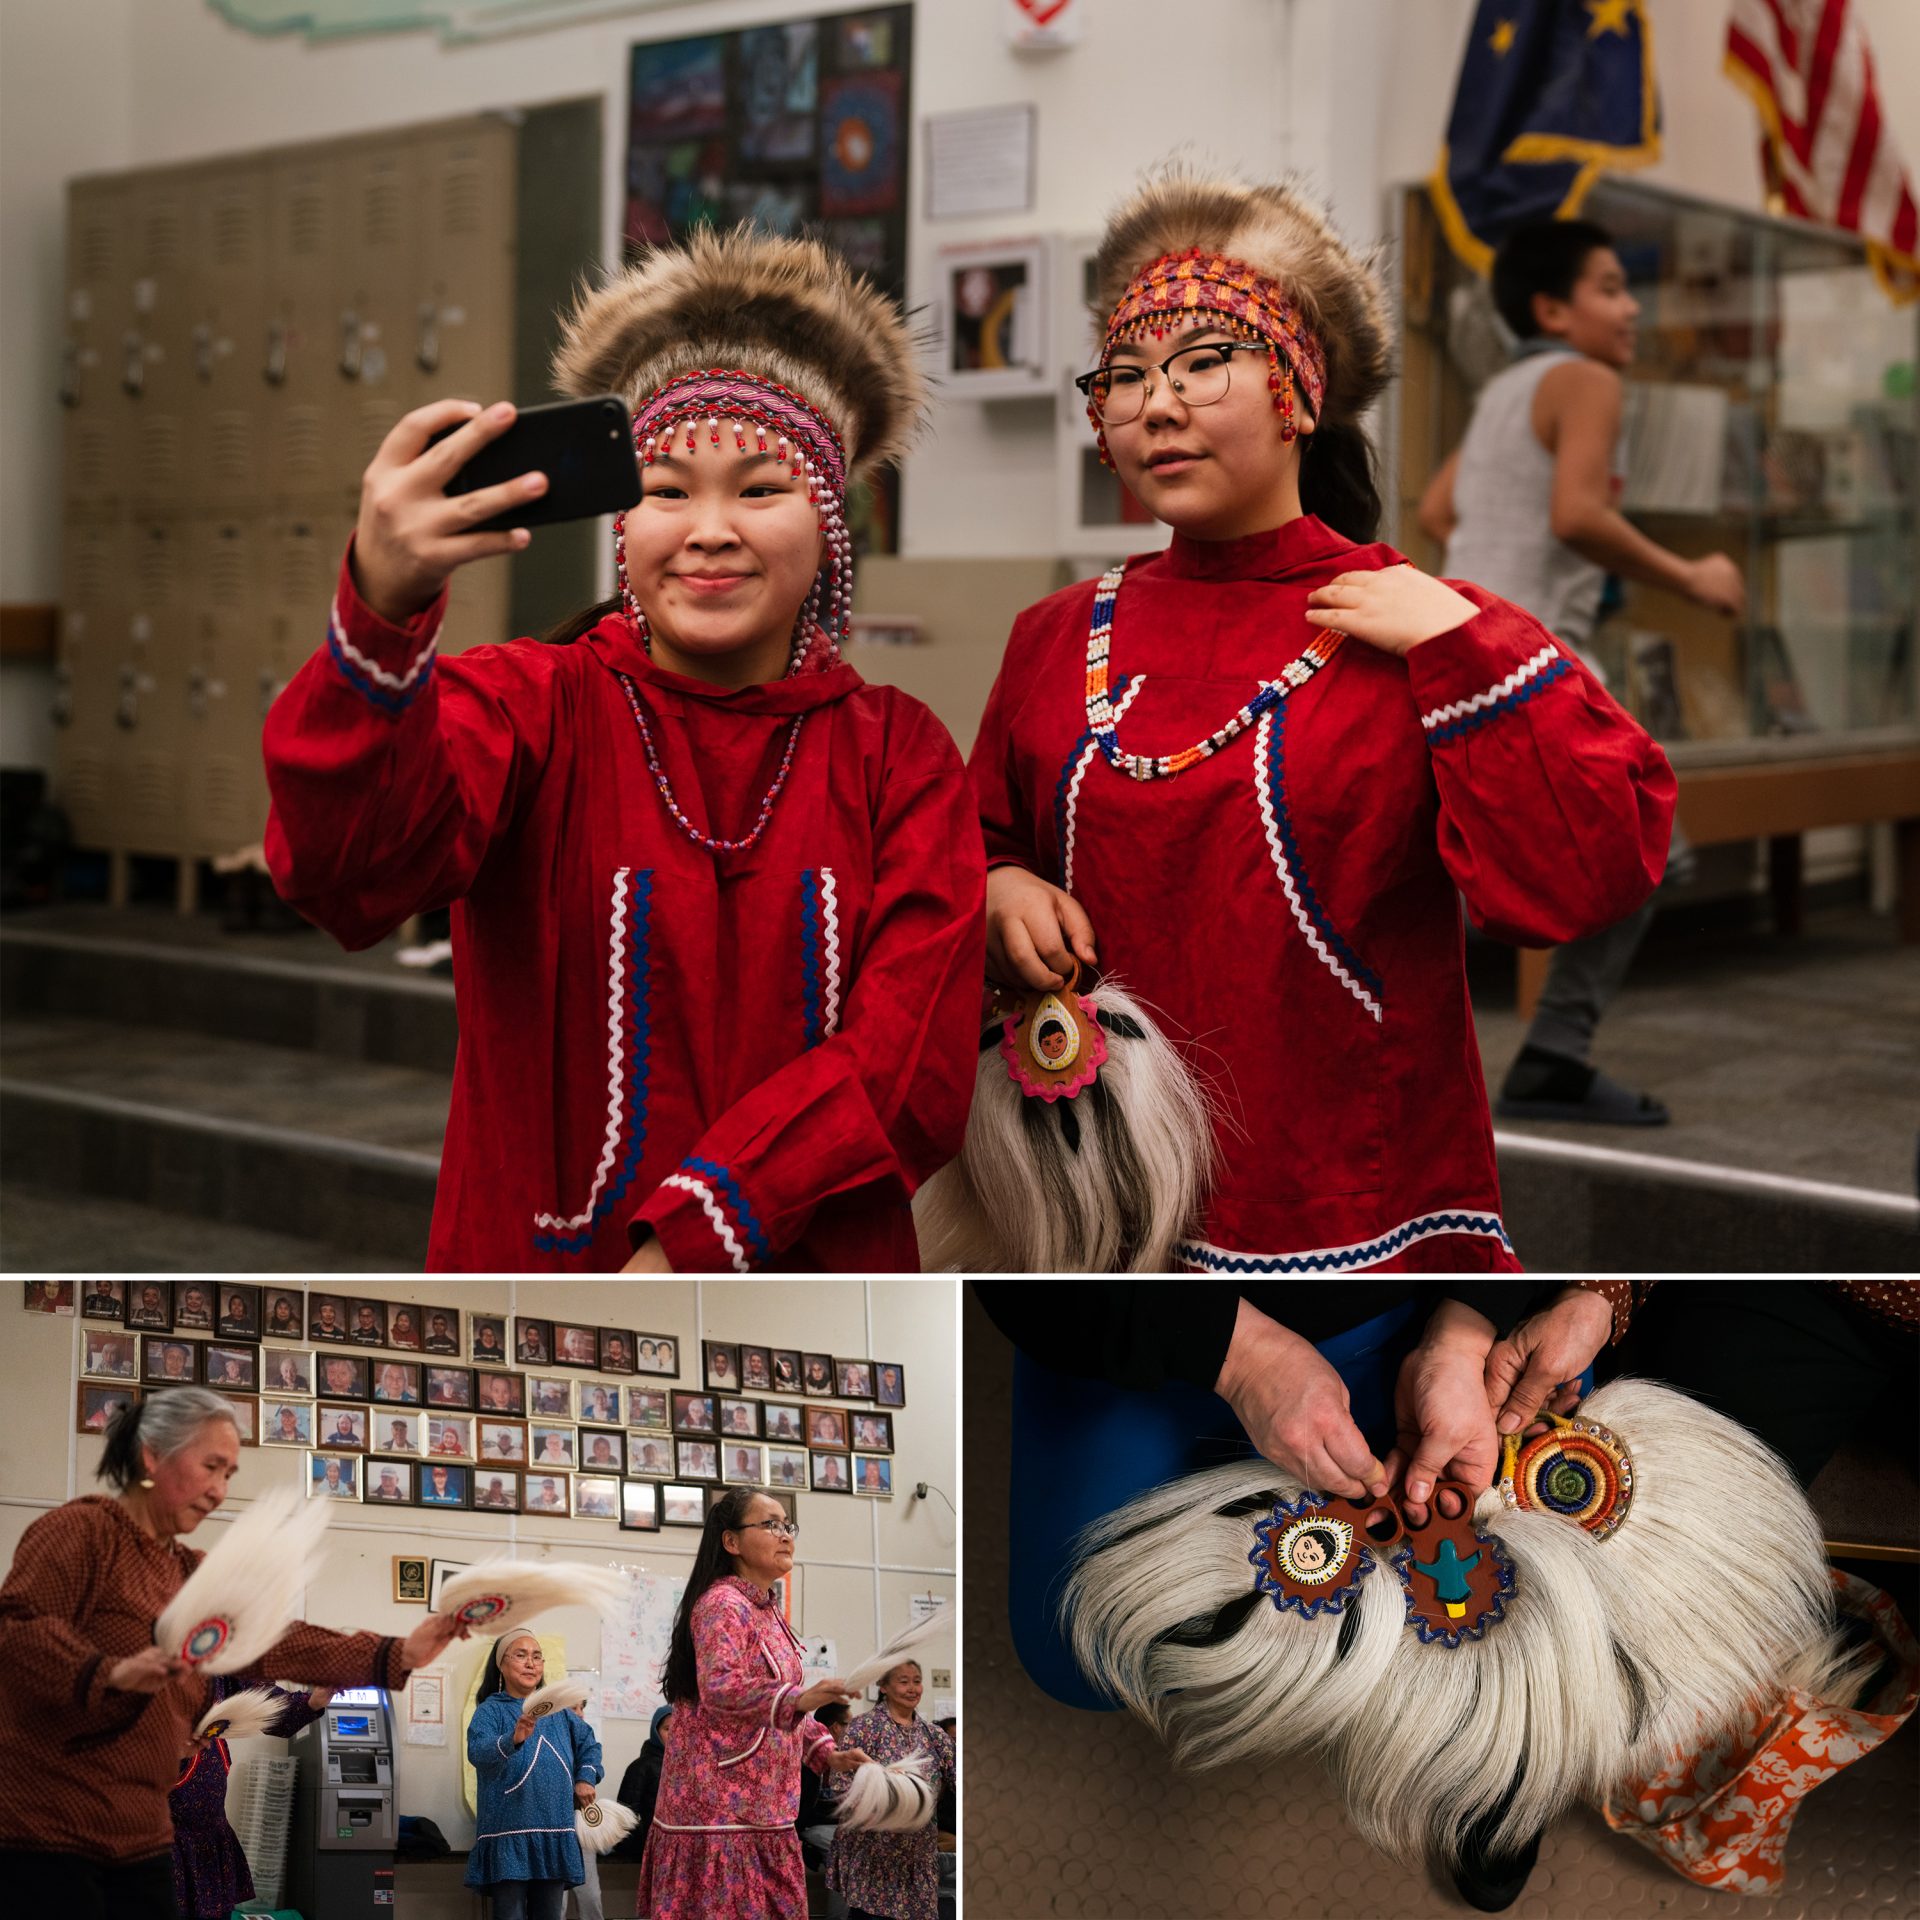 Top: Keziah Therchik (left) and Angel Charles take a selfie before performing Yup'ik dancing in Toksook Bay. Left: Dora Nicholai (in pink) dances at a community center, where portraits of the community's elders hang on a wall. Right: Women show Yup'ik dance fans.